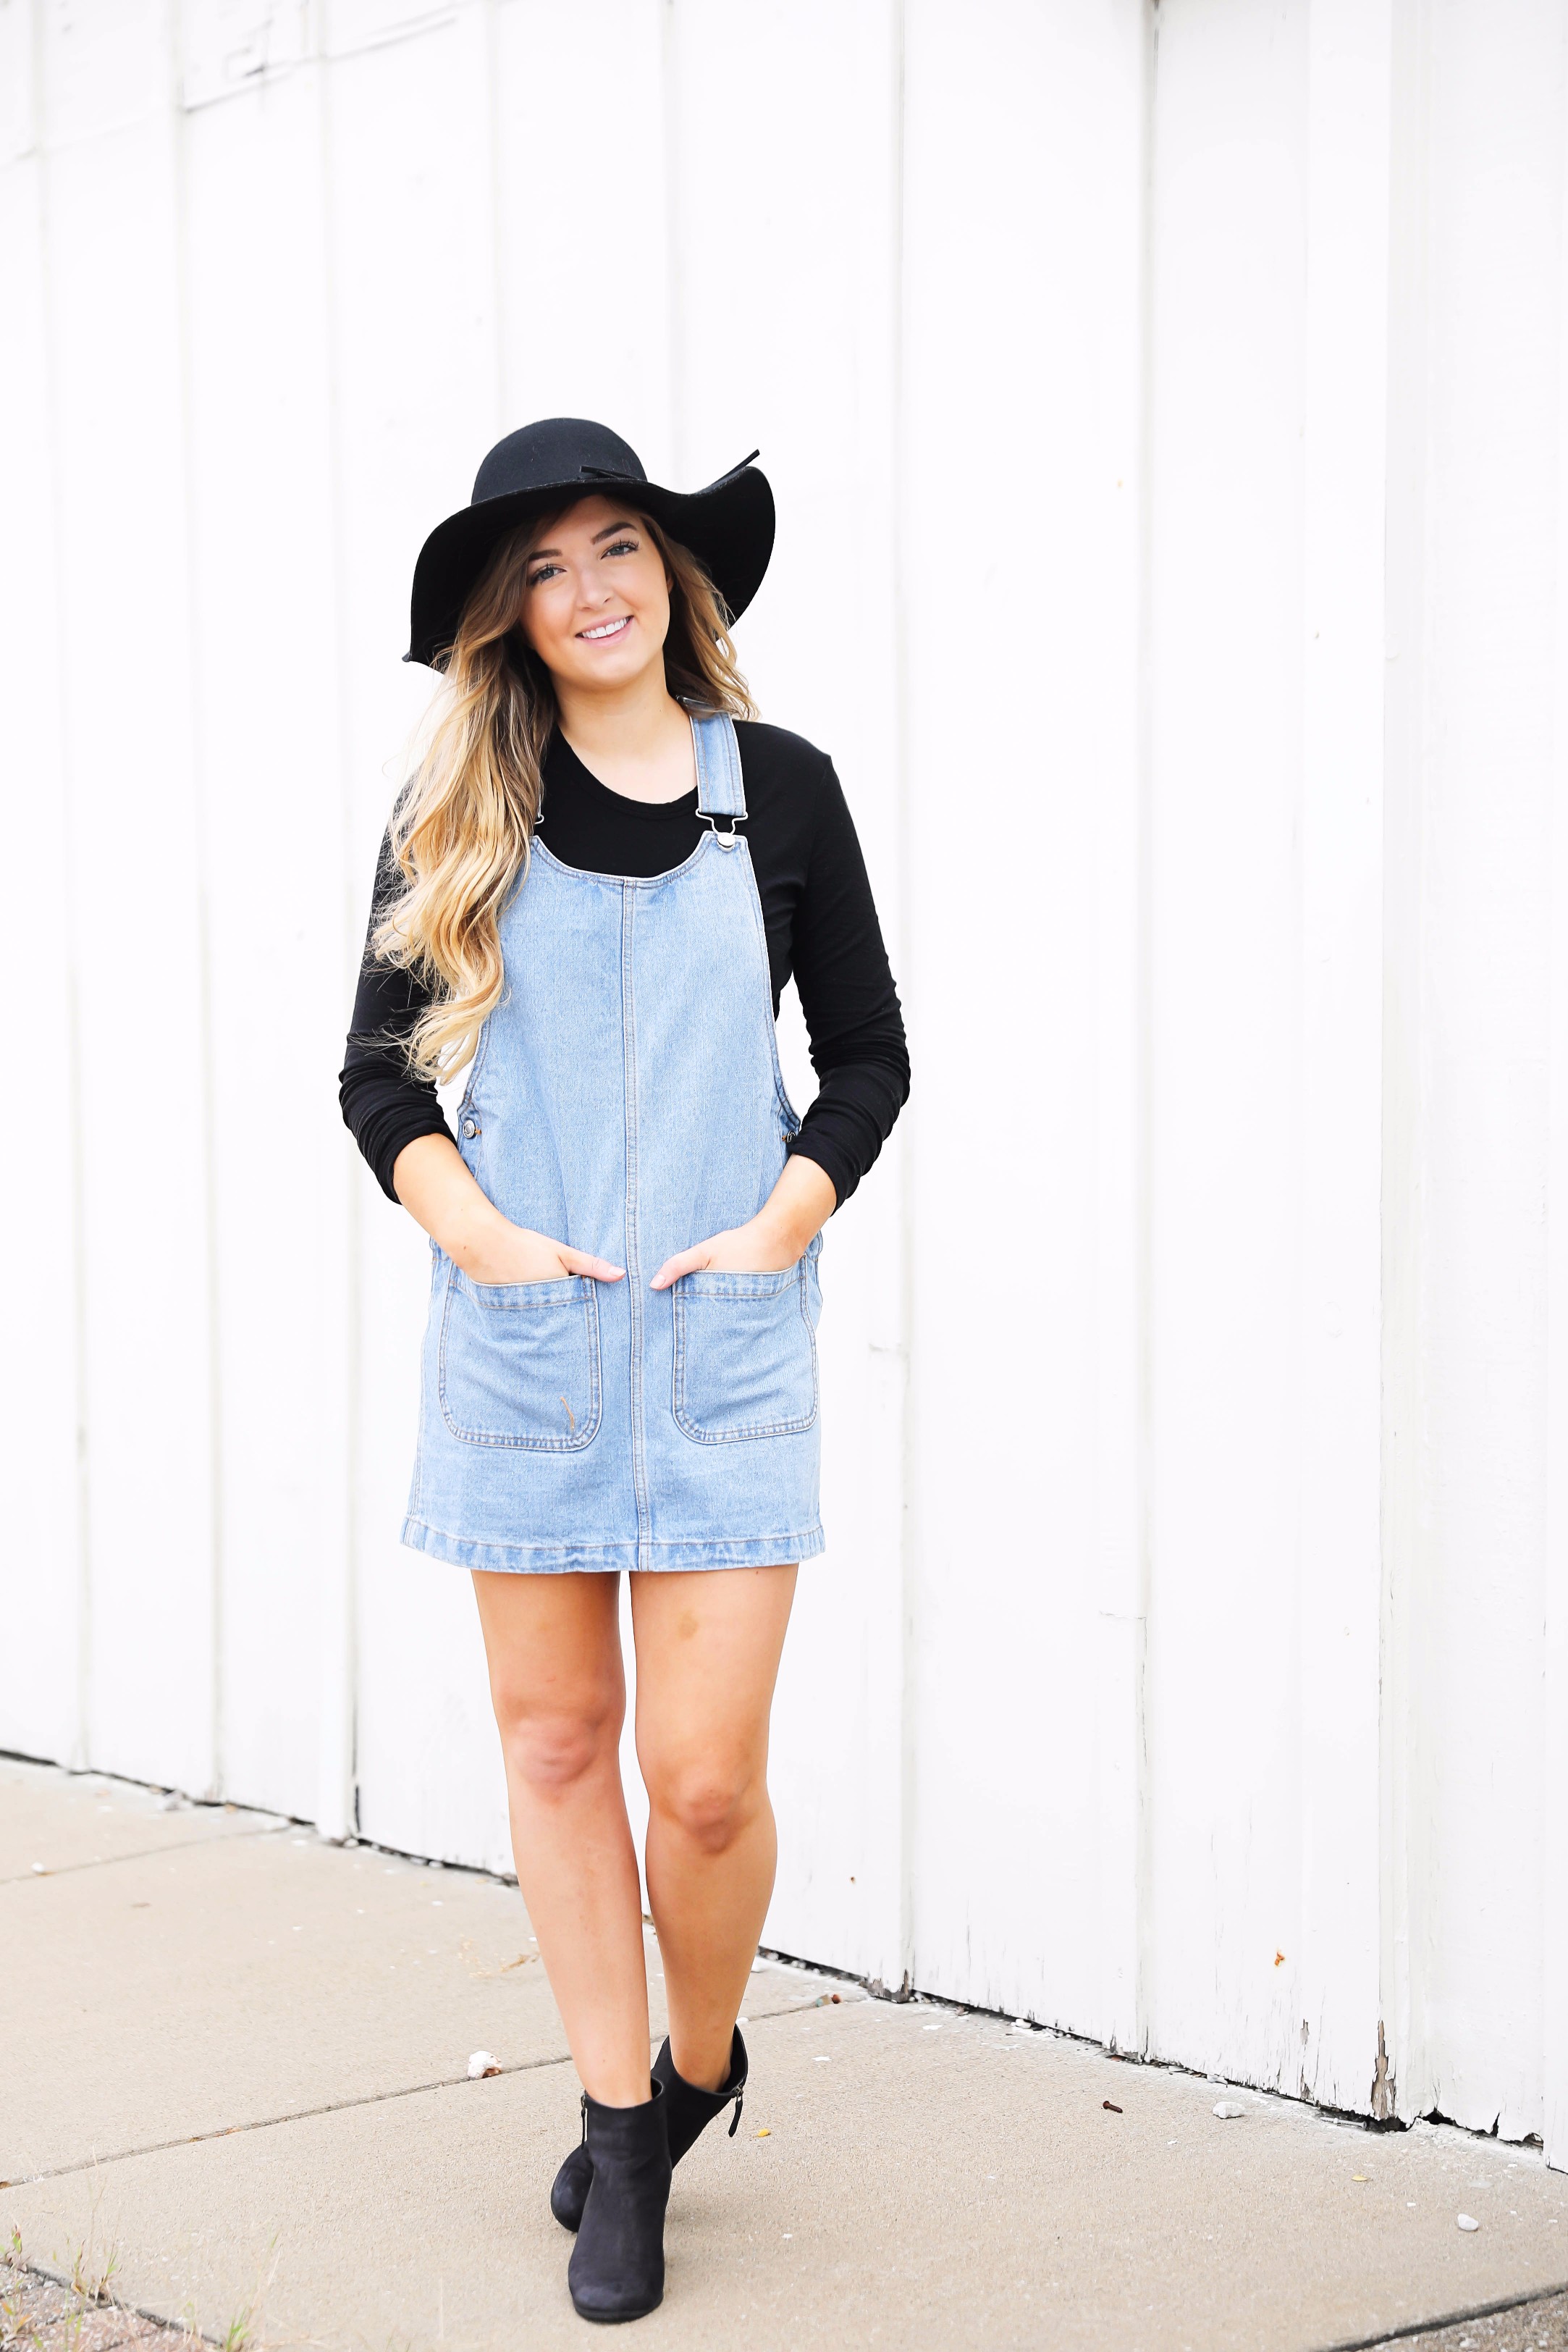 Fall outfit idea! Overall dress and black floppy hat and black booties! I love this look! Find the details on fashion blog daily dose of charm by lauren lindmark